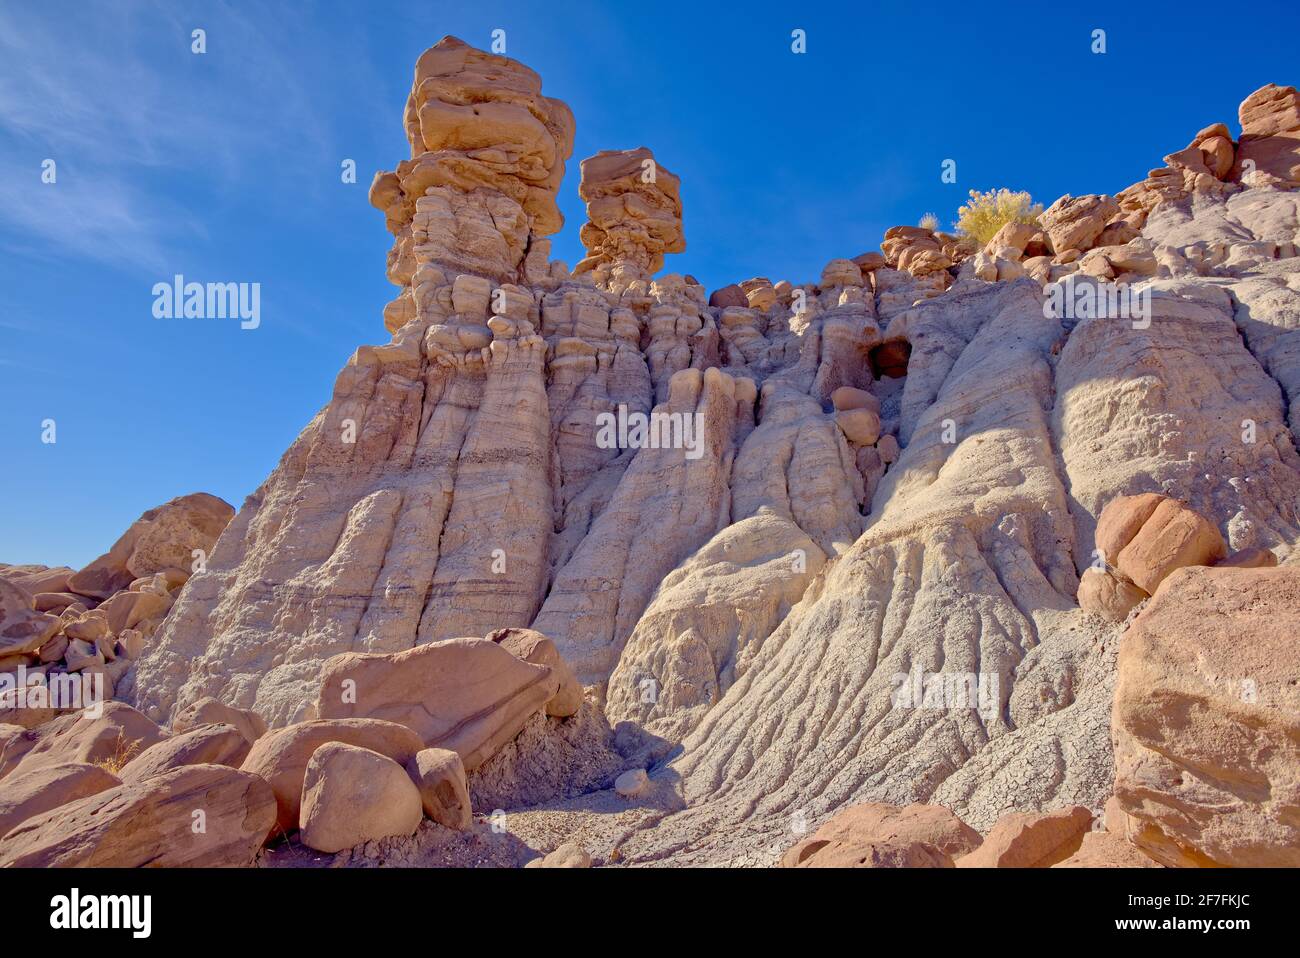 Giant Hoodoos in the Devil's Playground at Petrified Forest National Park, Arizona, United States of America, North America Stock Photo